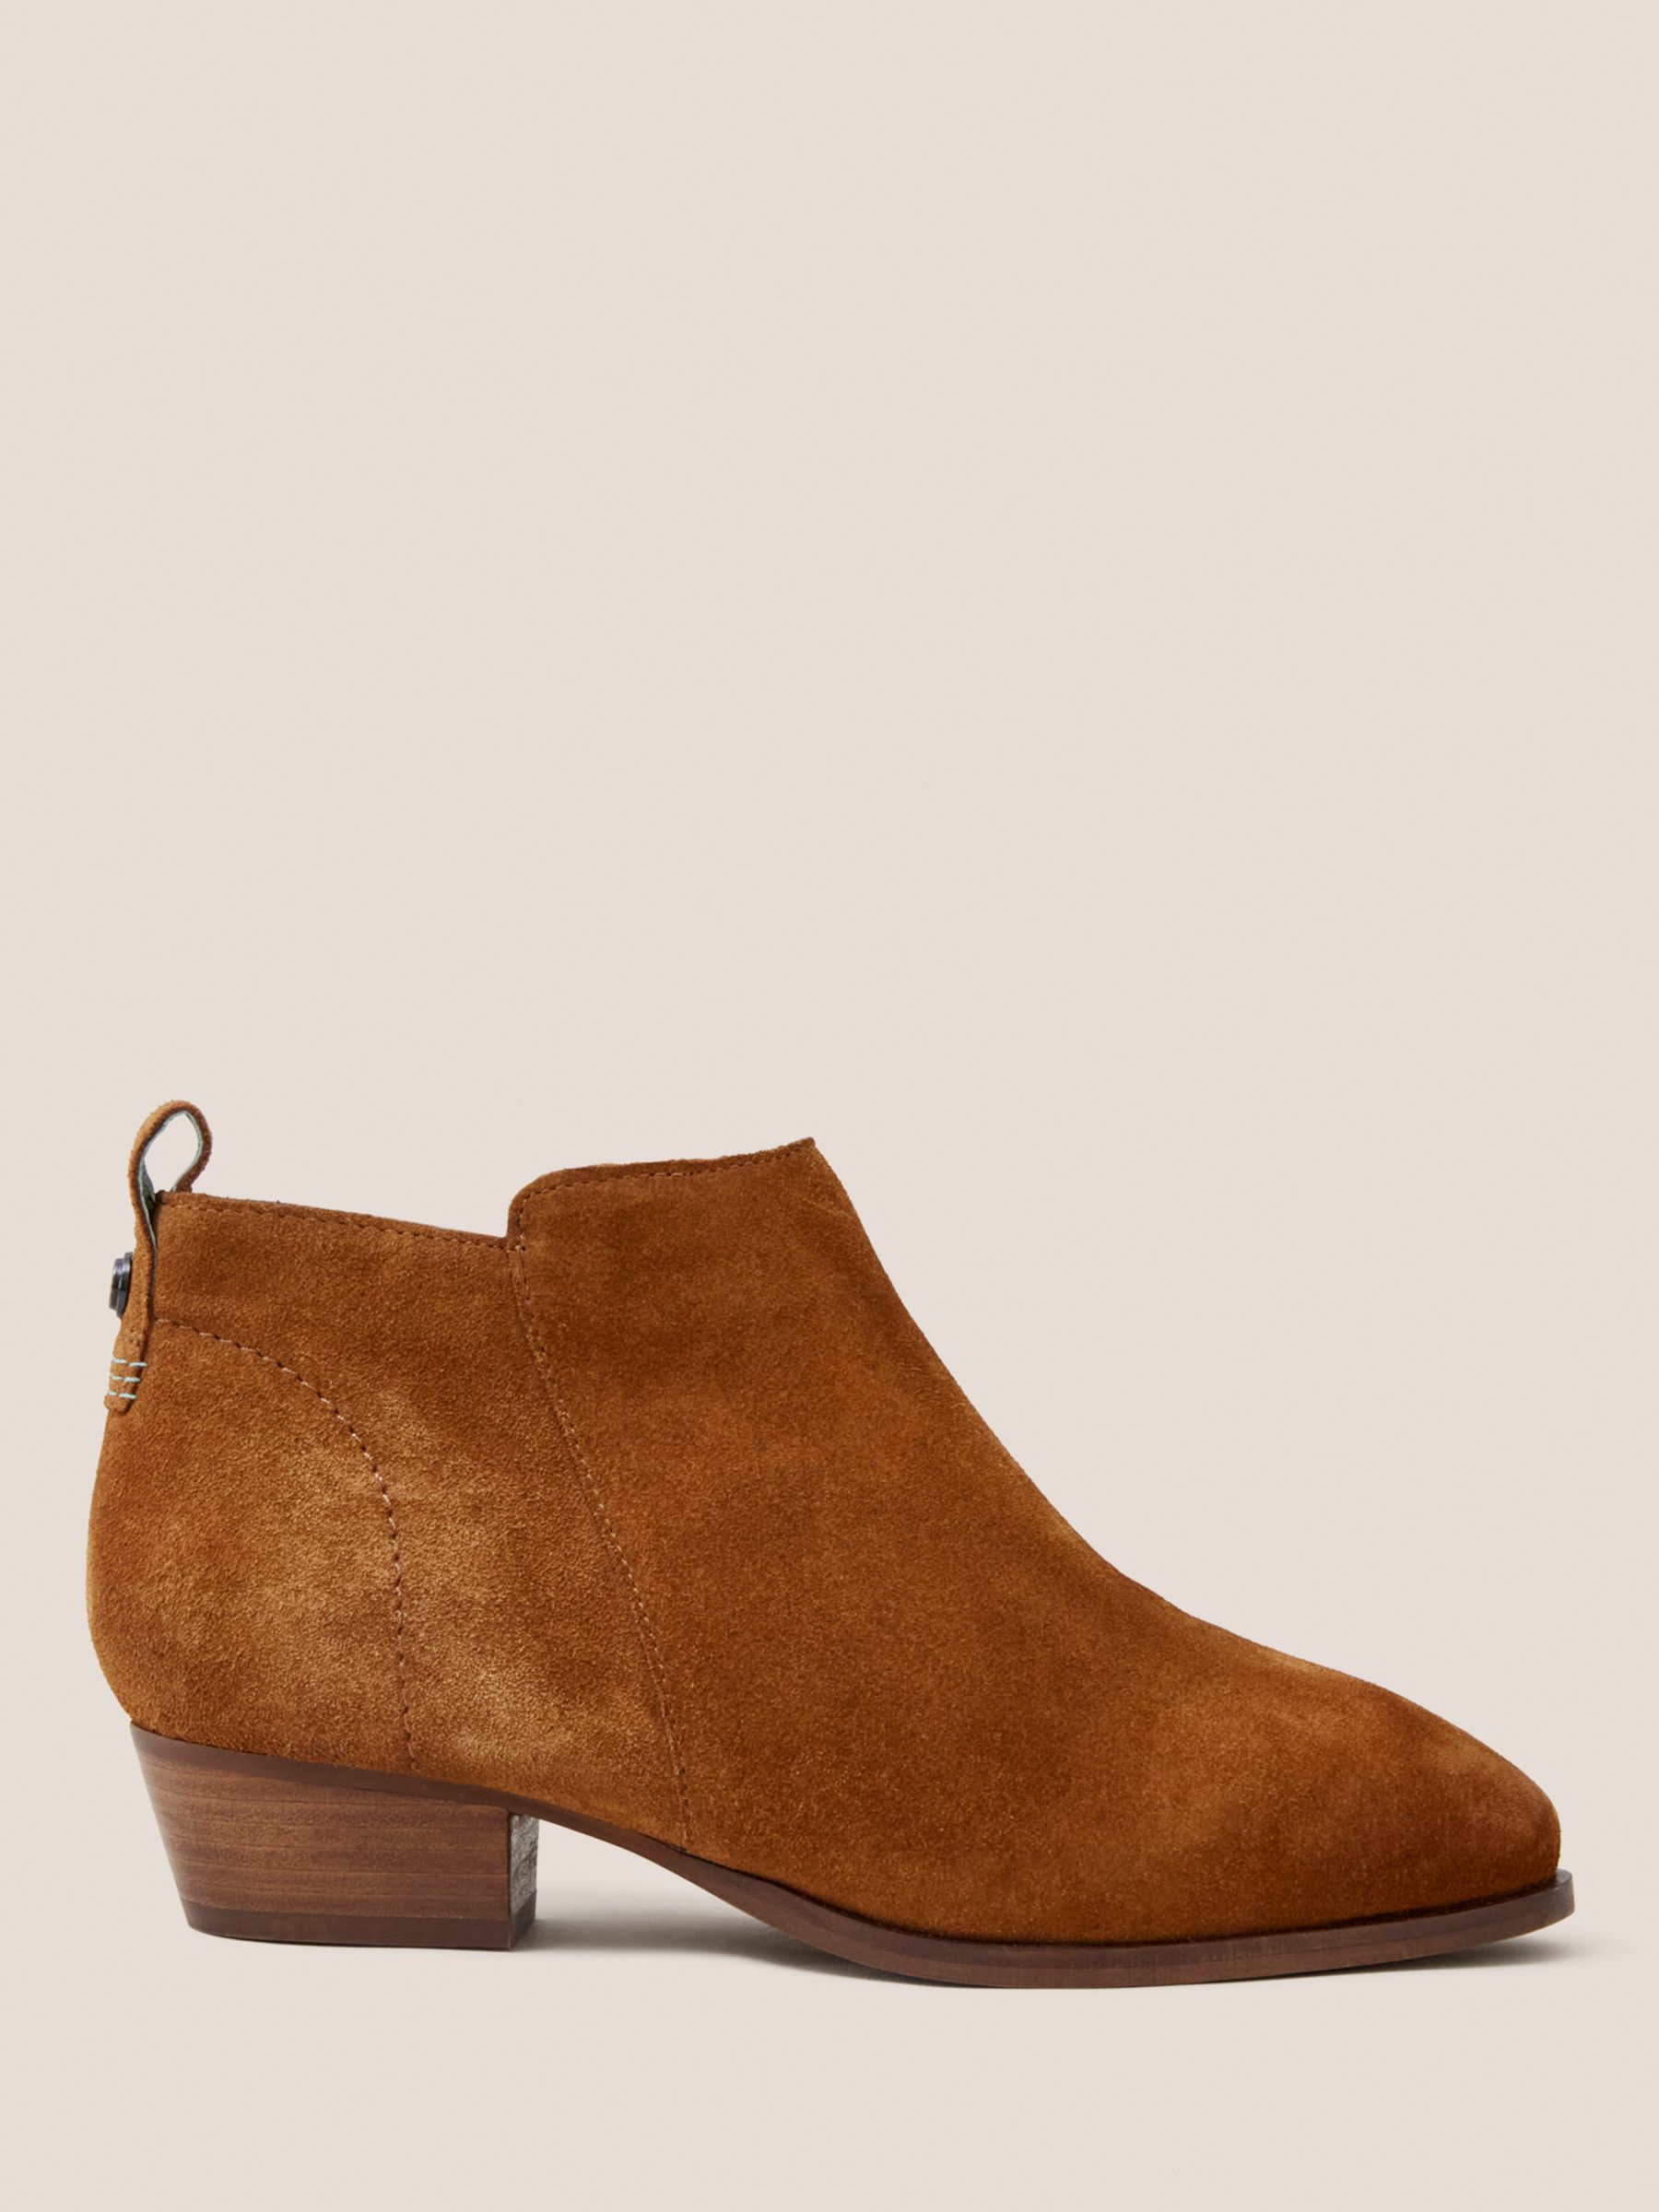 White Stuff Wide Fit Ankle Boots, Dark Tan at John Lewis & Partners